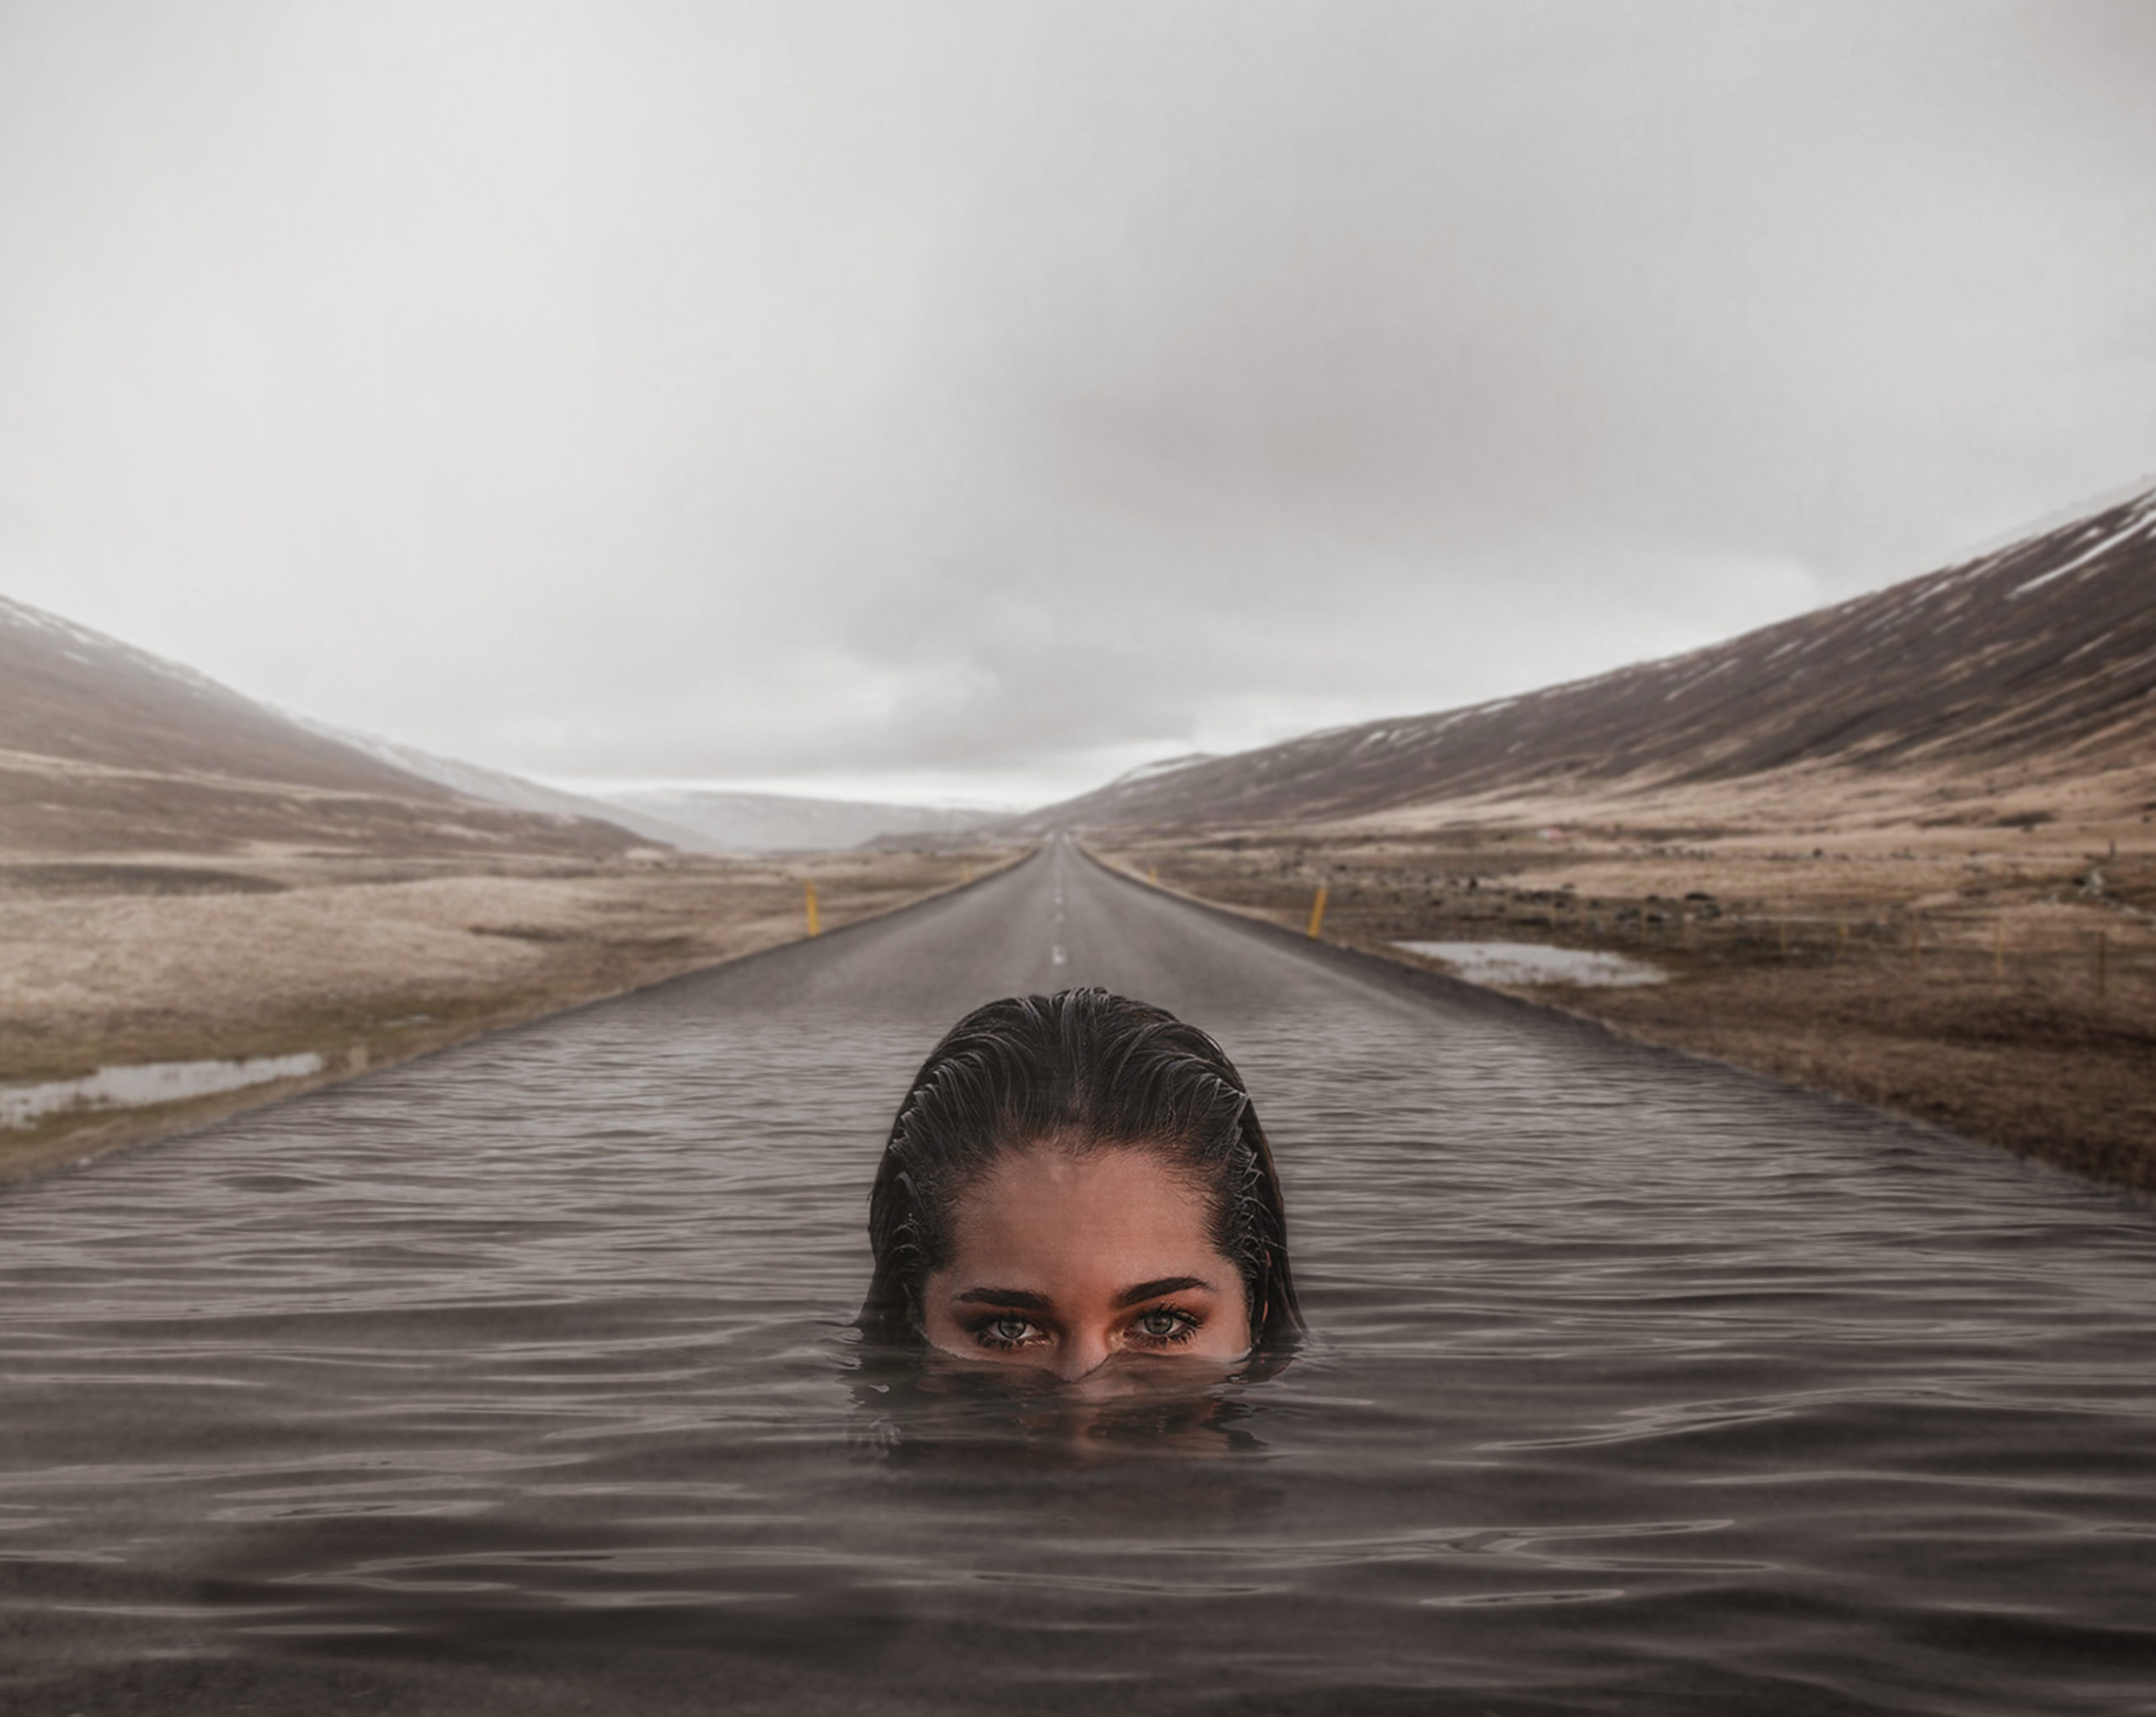 Swimming through road | Sunlinedesign